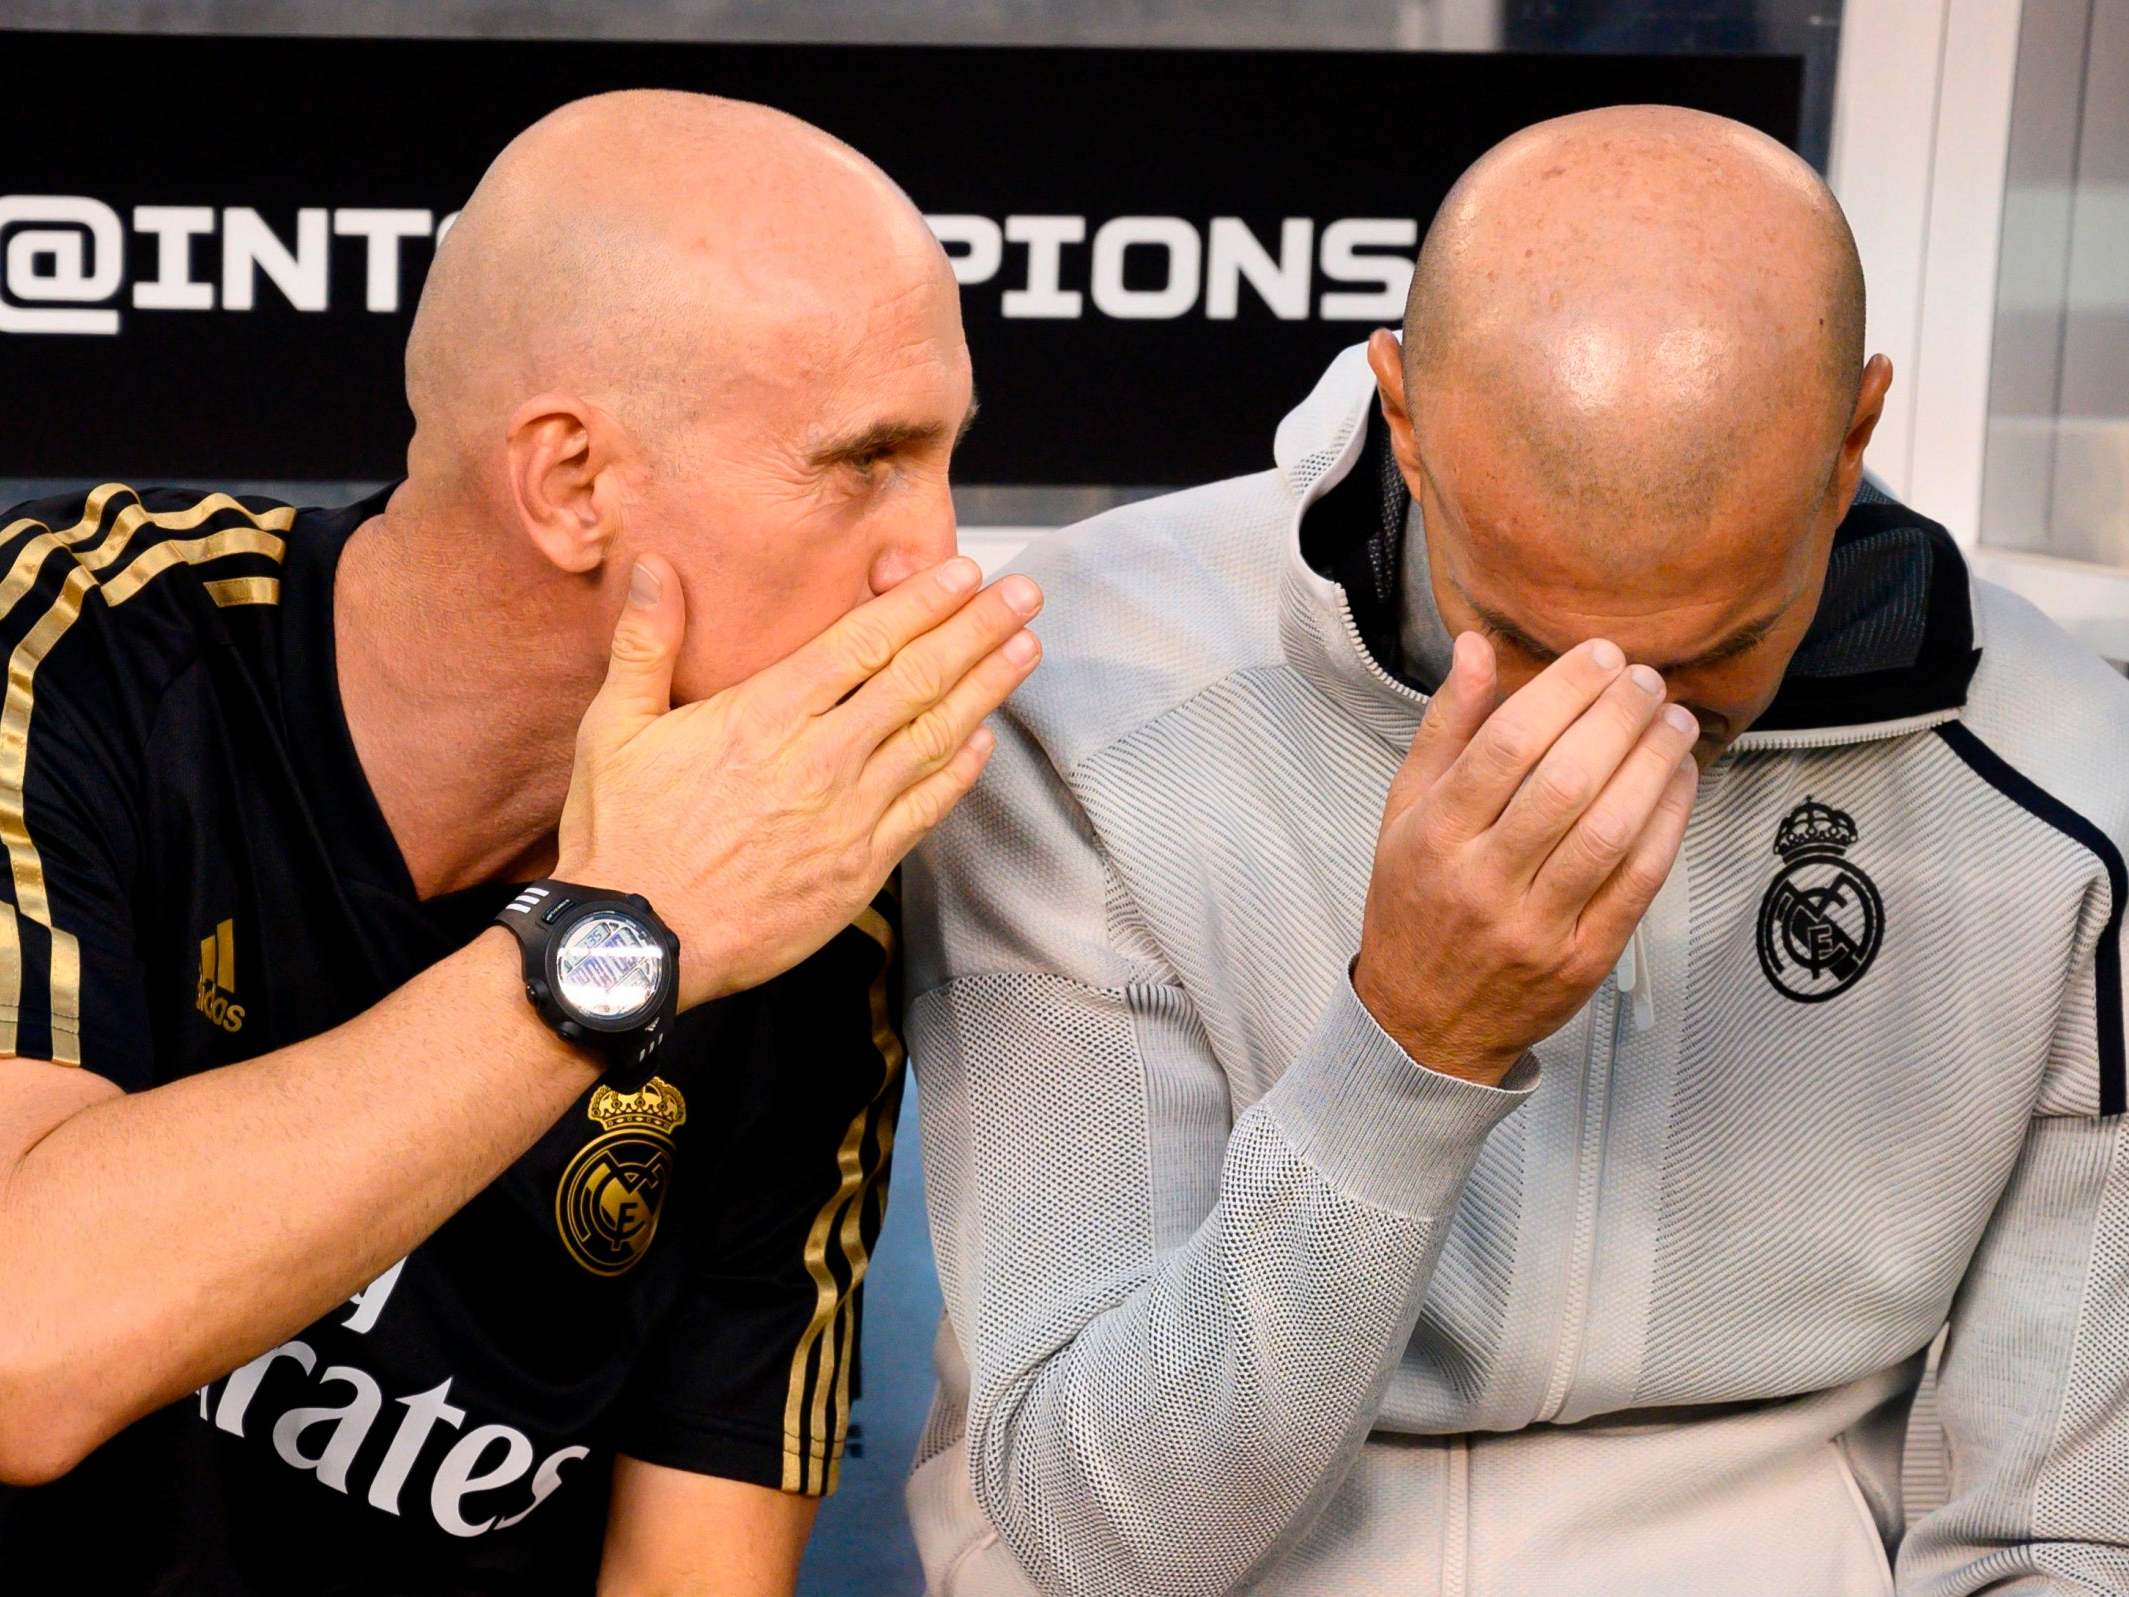 Zinedine Zidane was not impressed with his side's performance